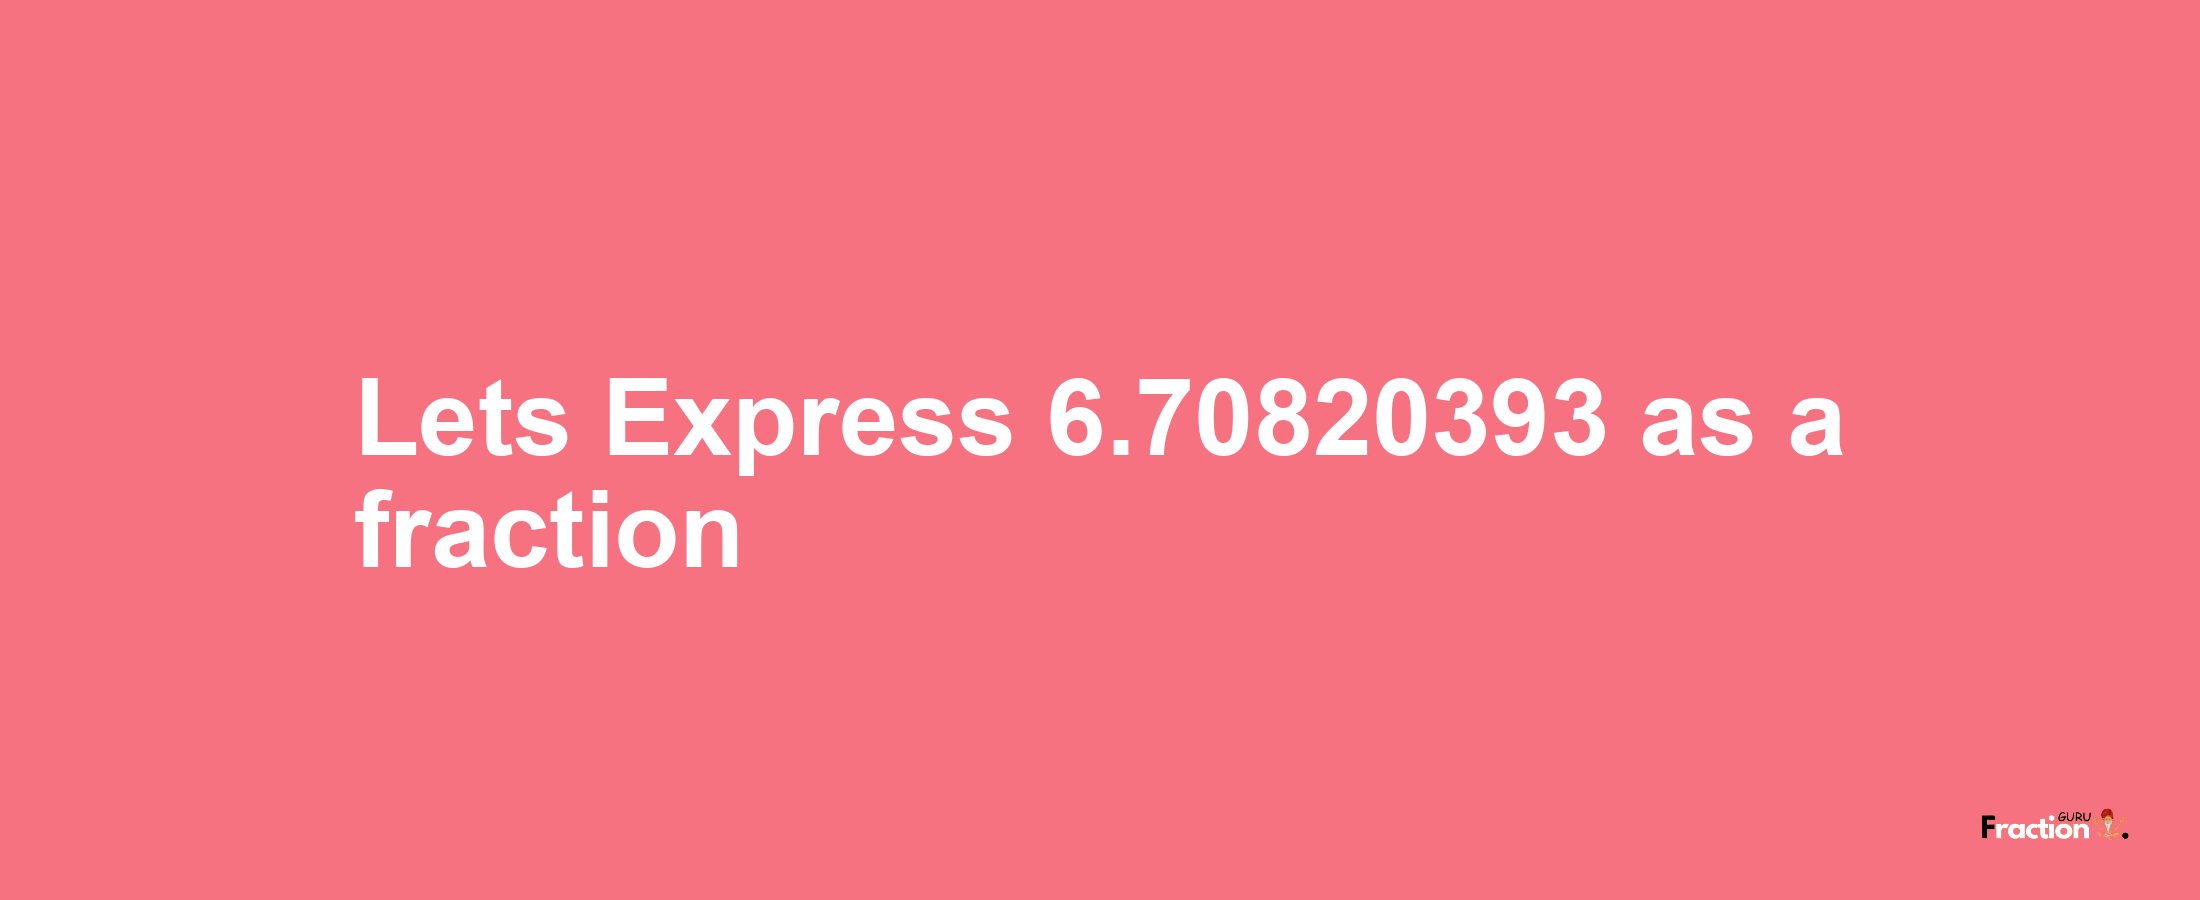 Lets Express 6.70820393 as afraction